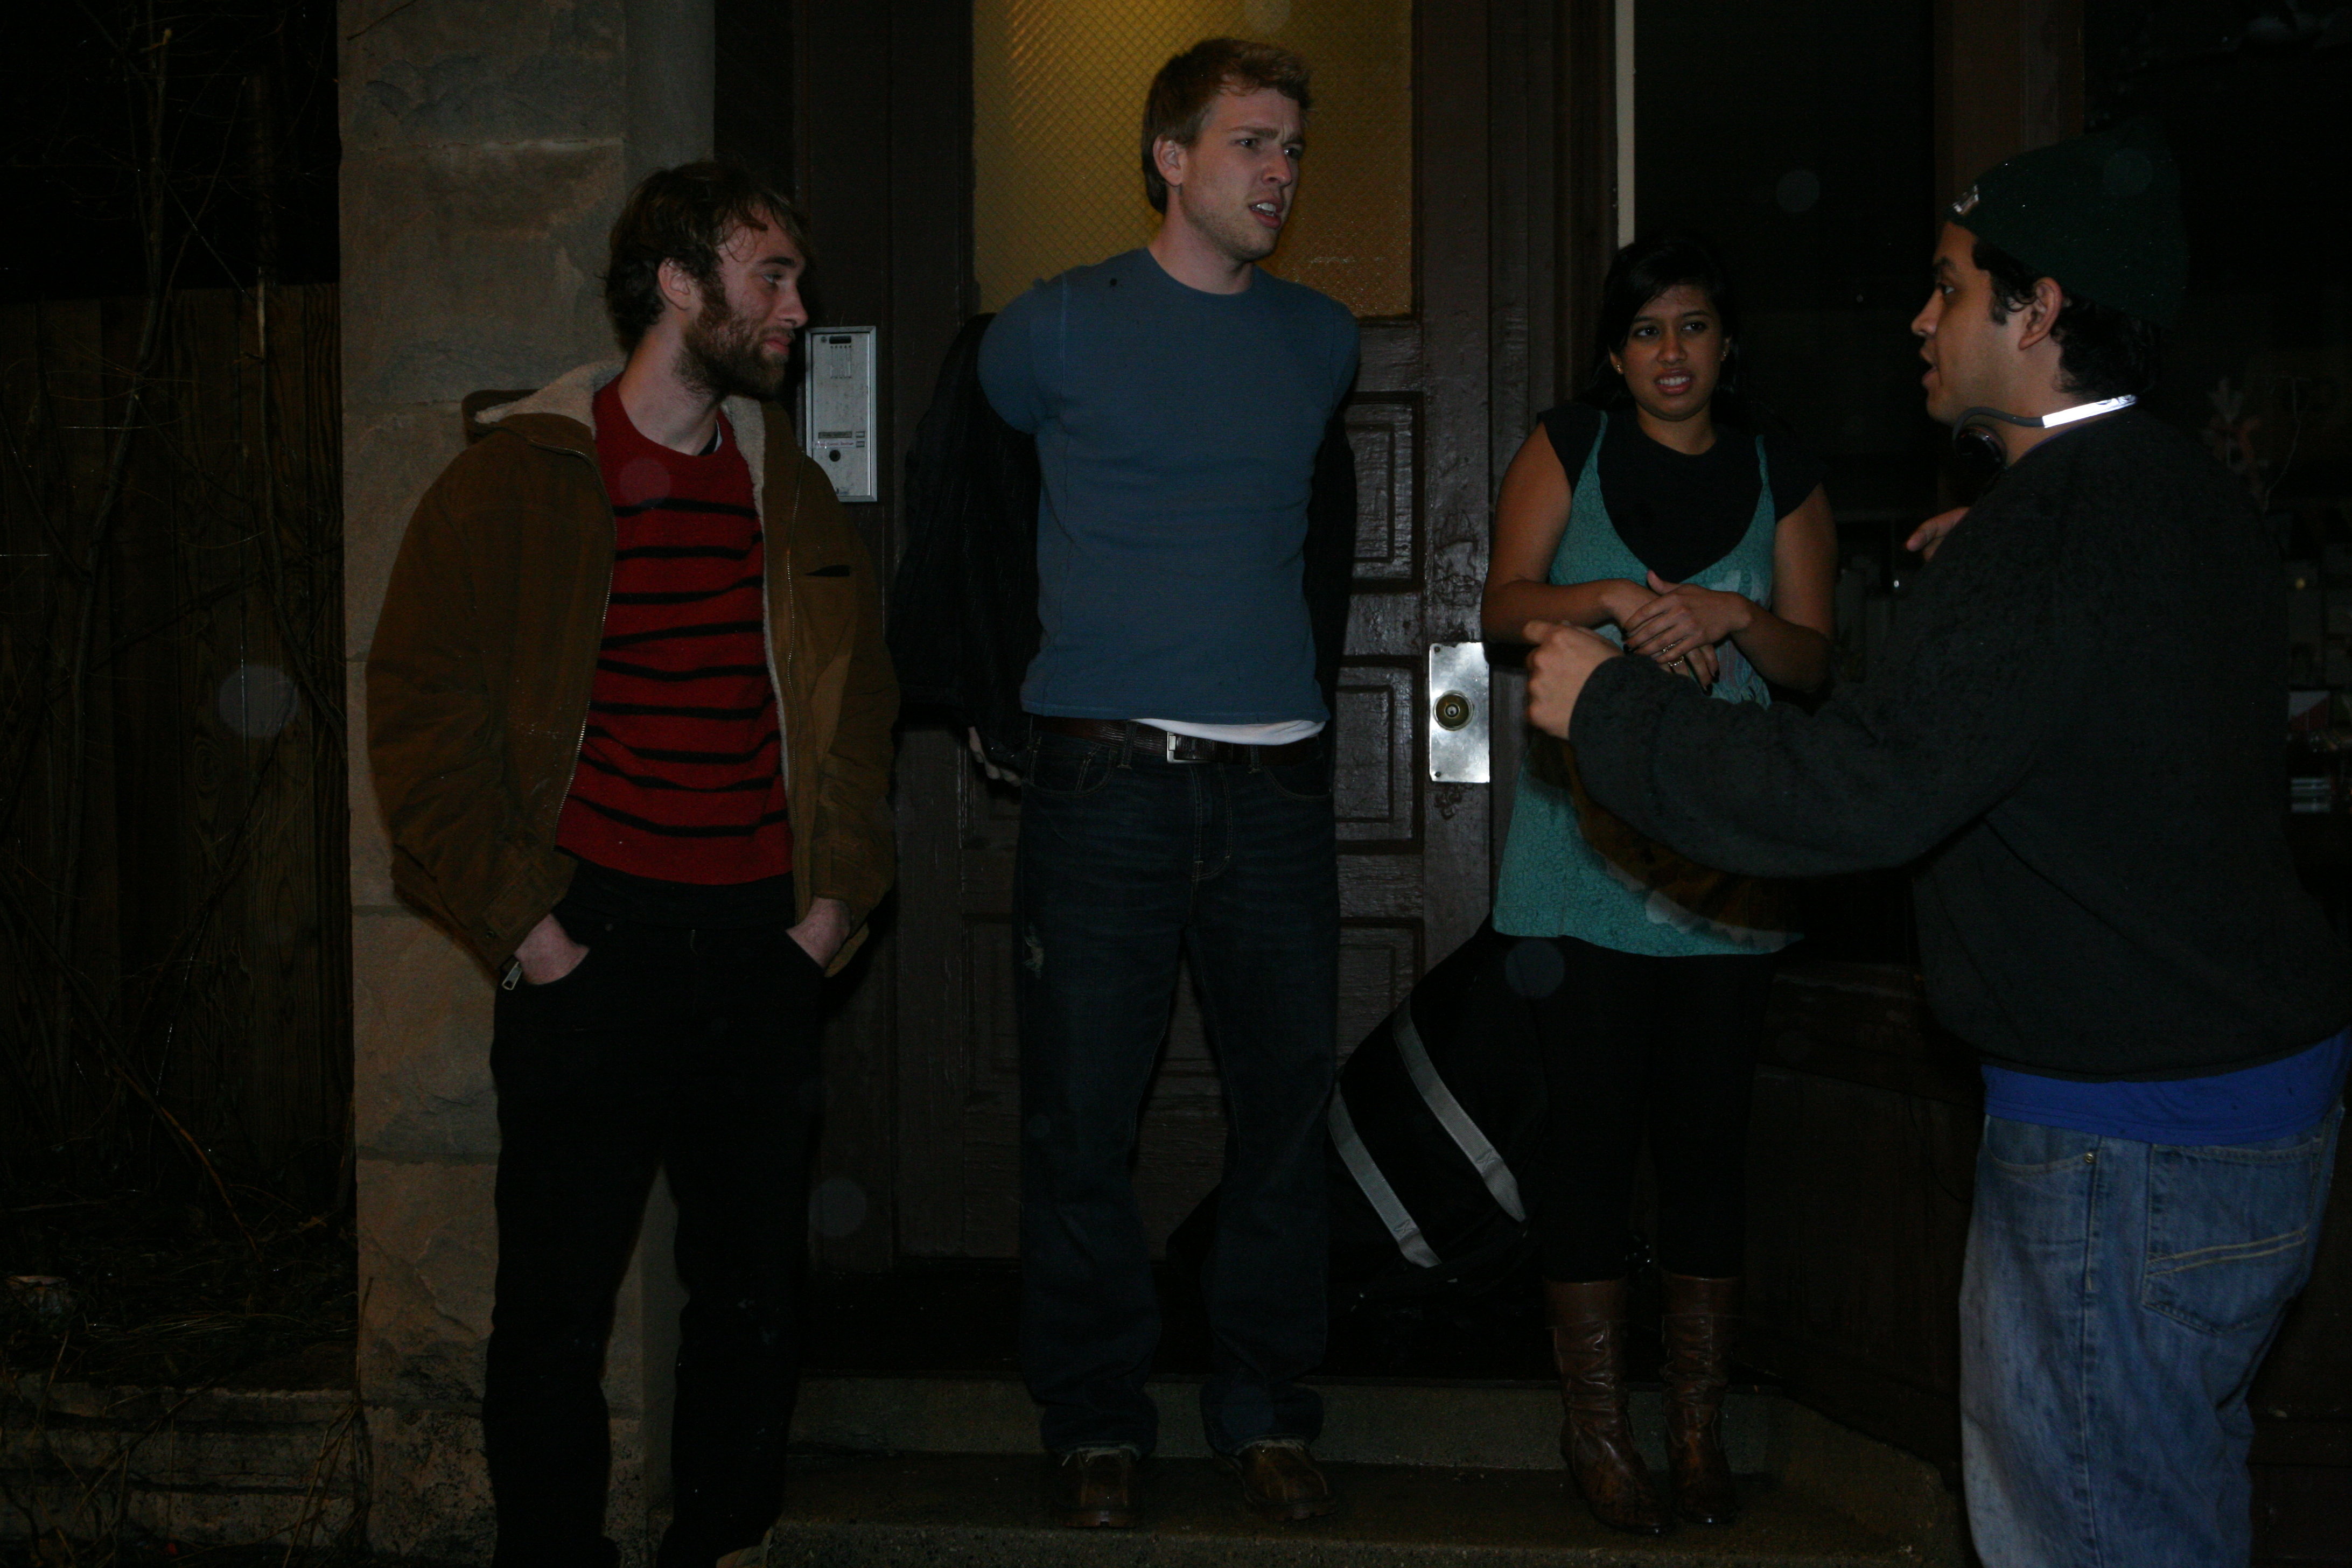 Nelson Carvajal, Amy Shah, Hank Stahlecker and Lyle Werner in Ad Hominem (2009)